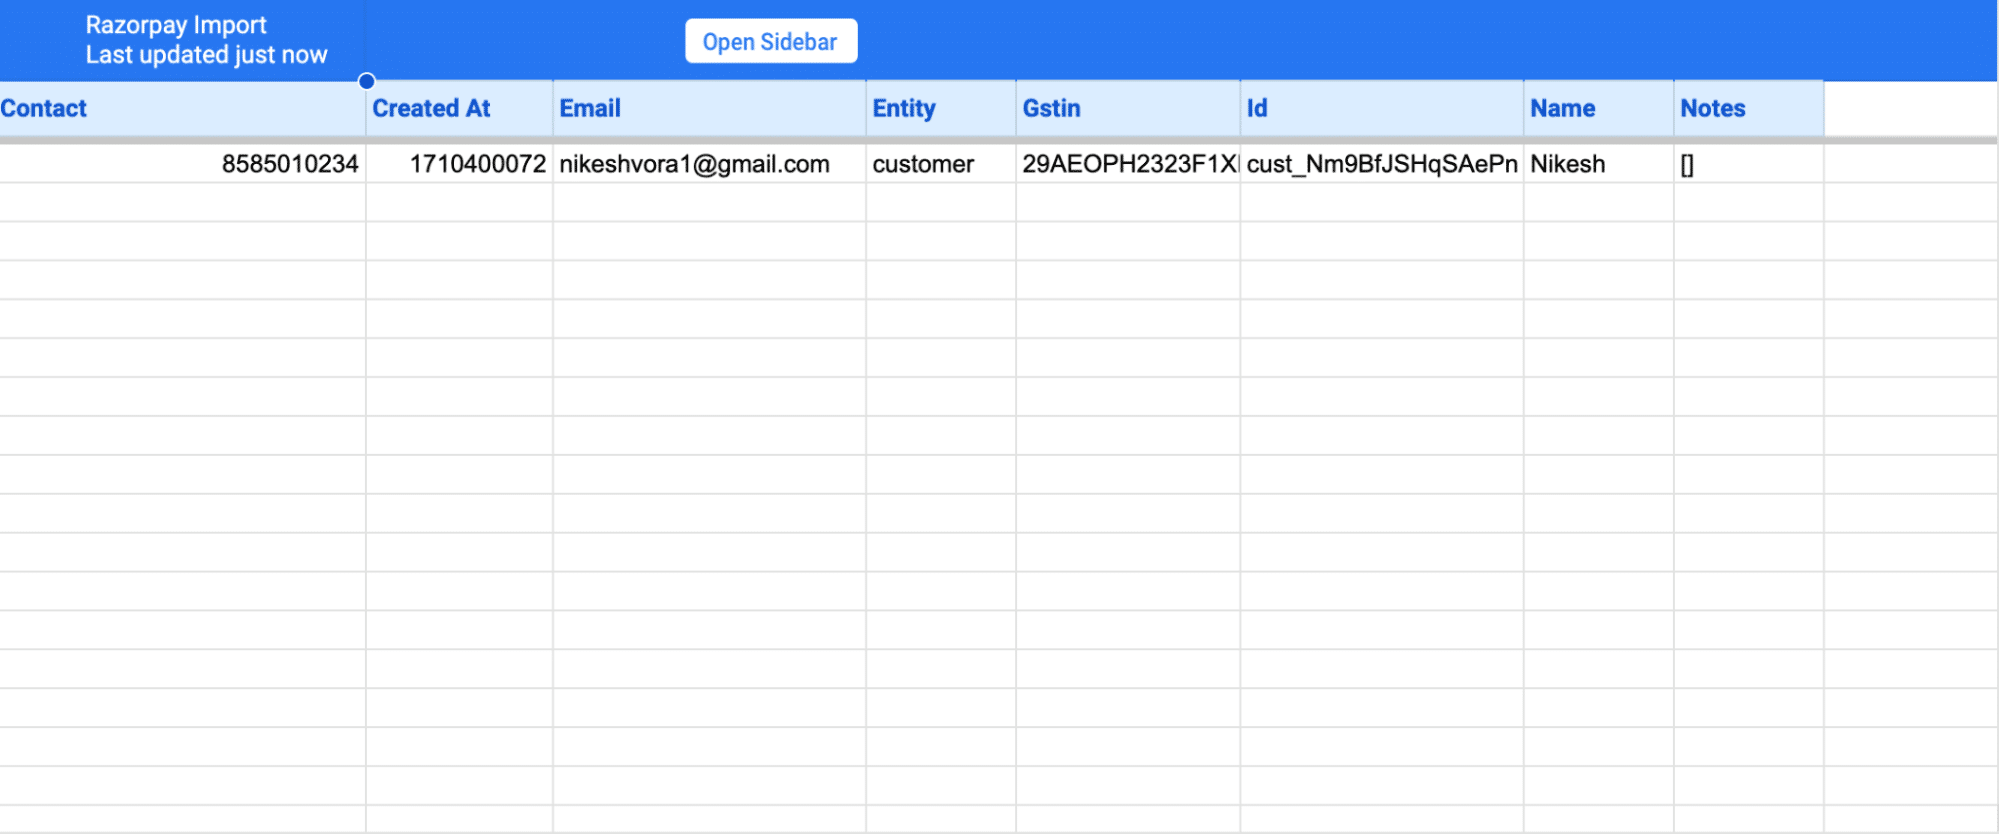 Clicking “Import” to fetch the Razorpay data into your spreadsheet.